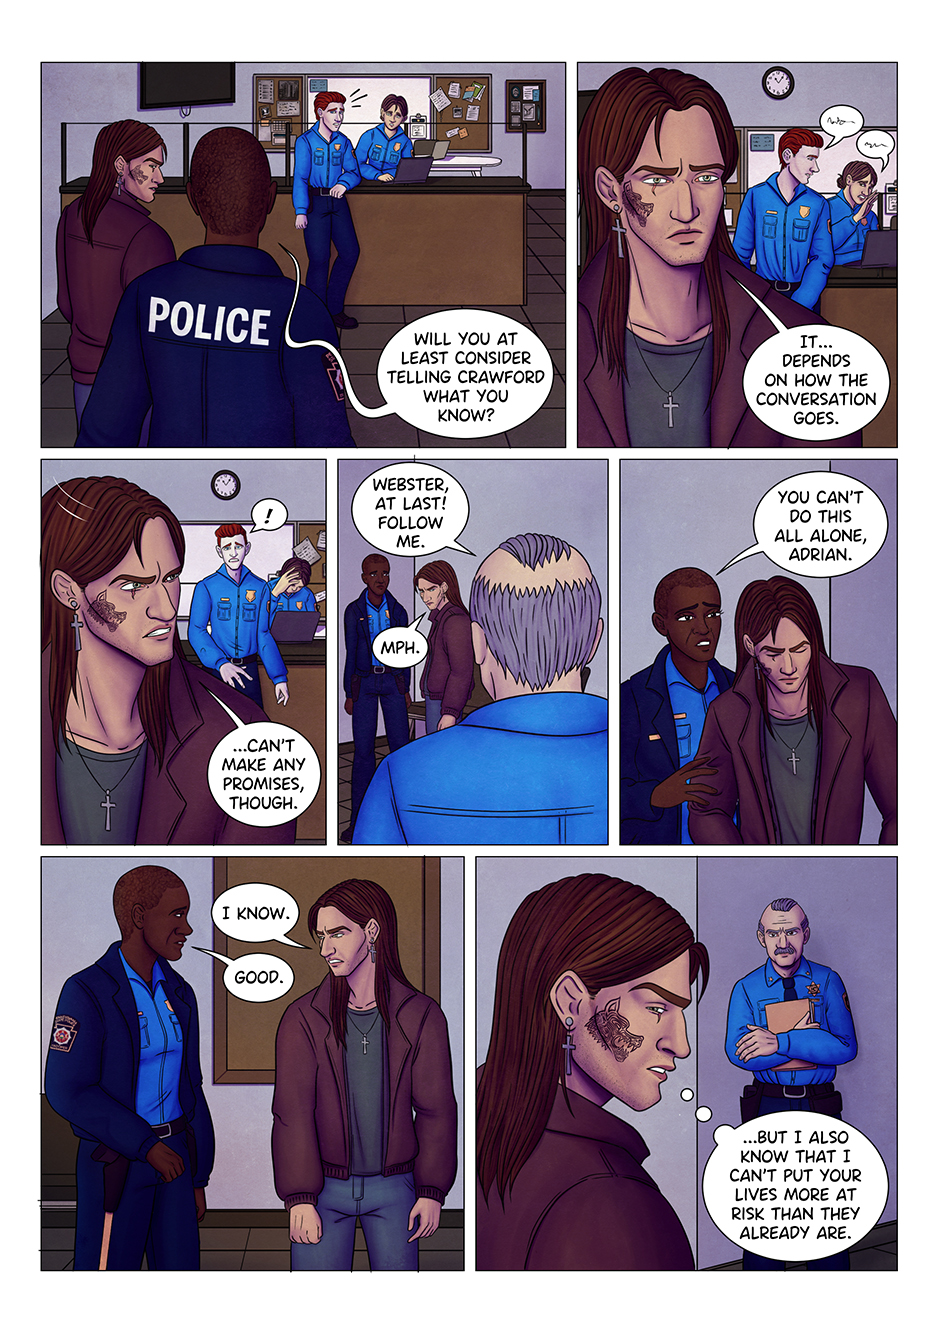 Adrian and Aaliyah enter the police station as they keep talking. Aaliyah wants Adrian to tell the sheriff about his dream, but Adrian still isn't sure. Meeanwhile, some policemen seem to be gossiping about Adrian in the background. Sheriff Crawford comes in and asks Adrian to follow him.